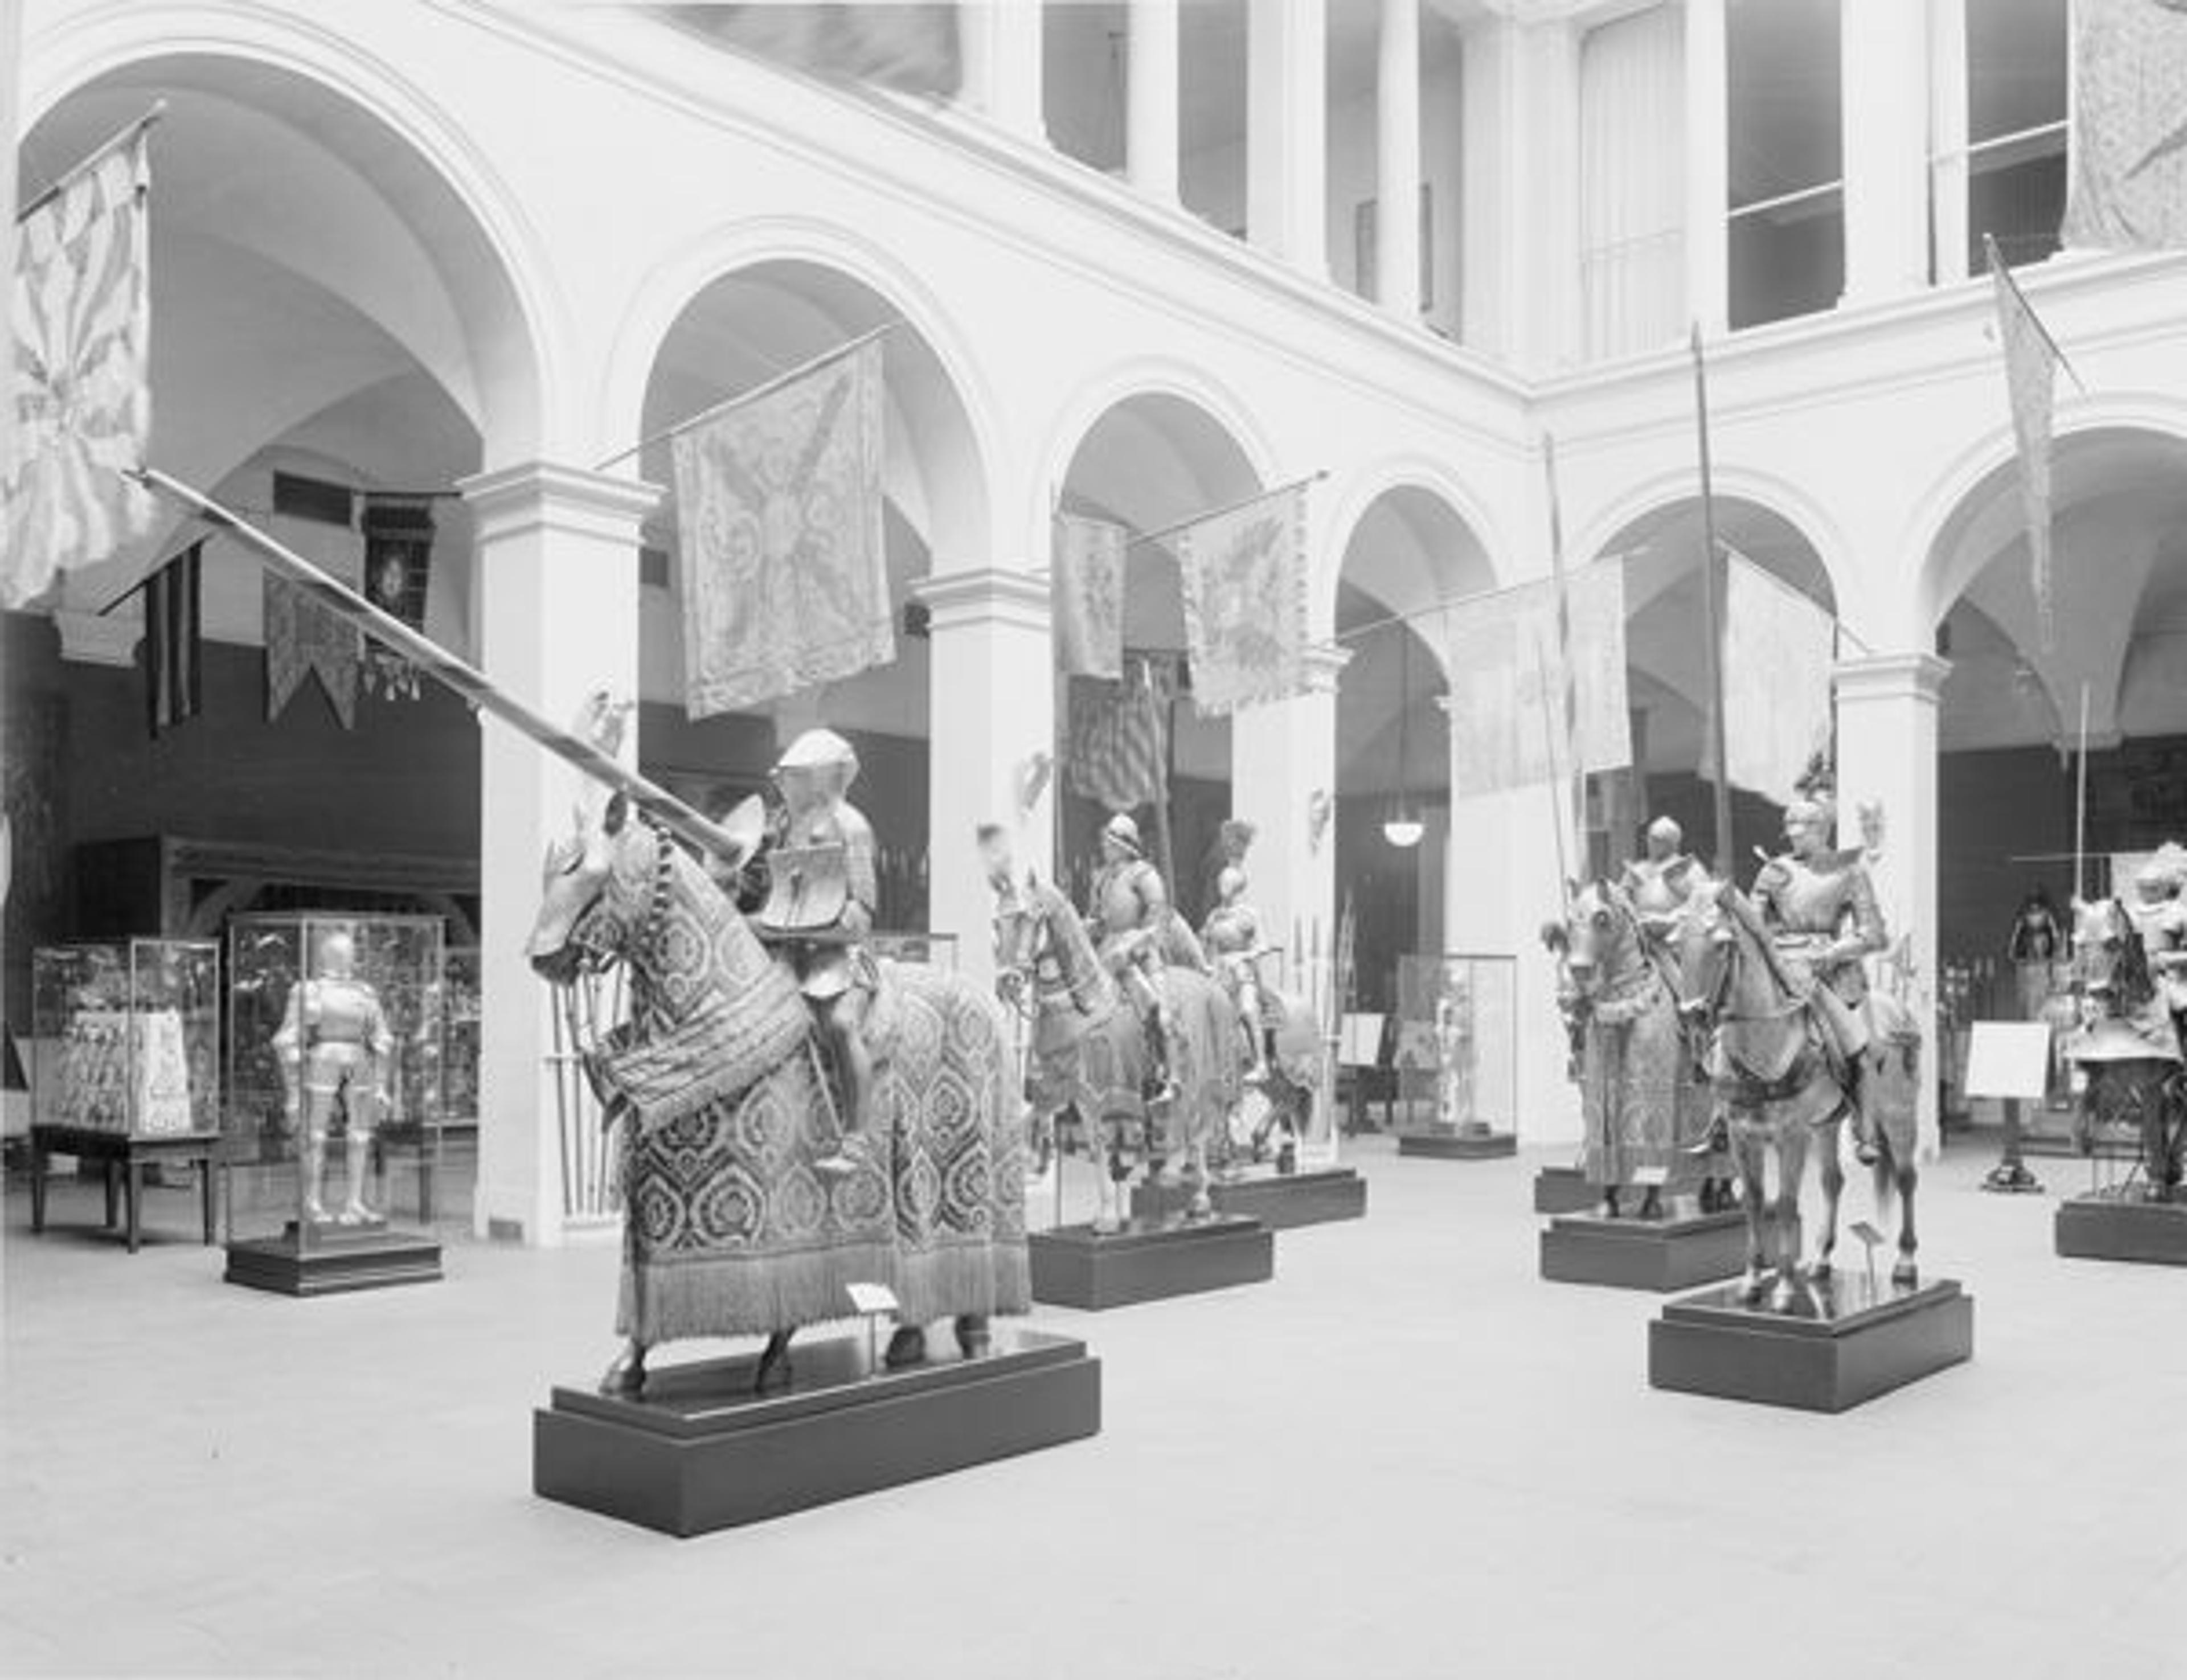 The Armor Hall of the Metropolitan Museum of Art as installed by Dean in 1915 (photographed in 1921)